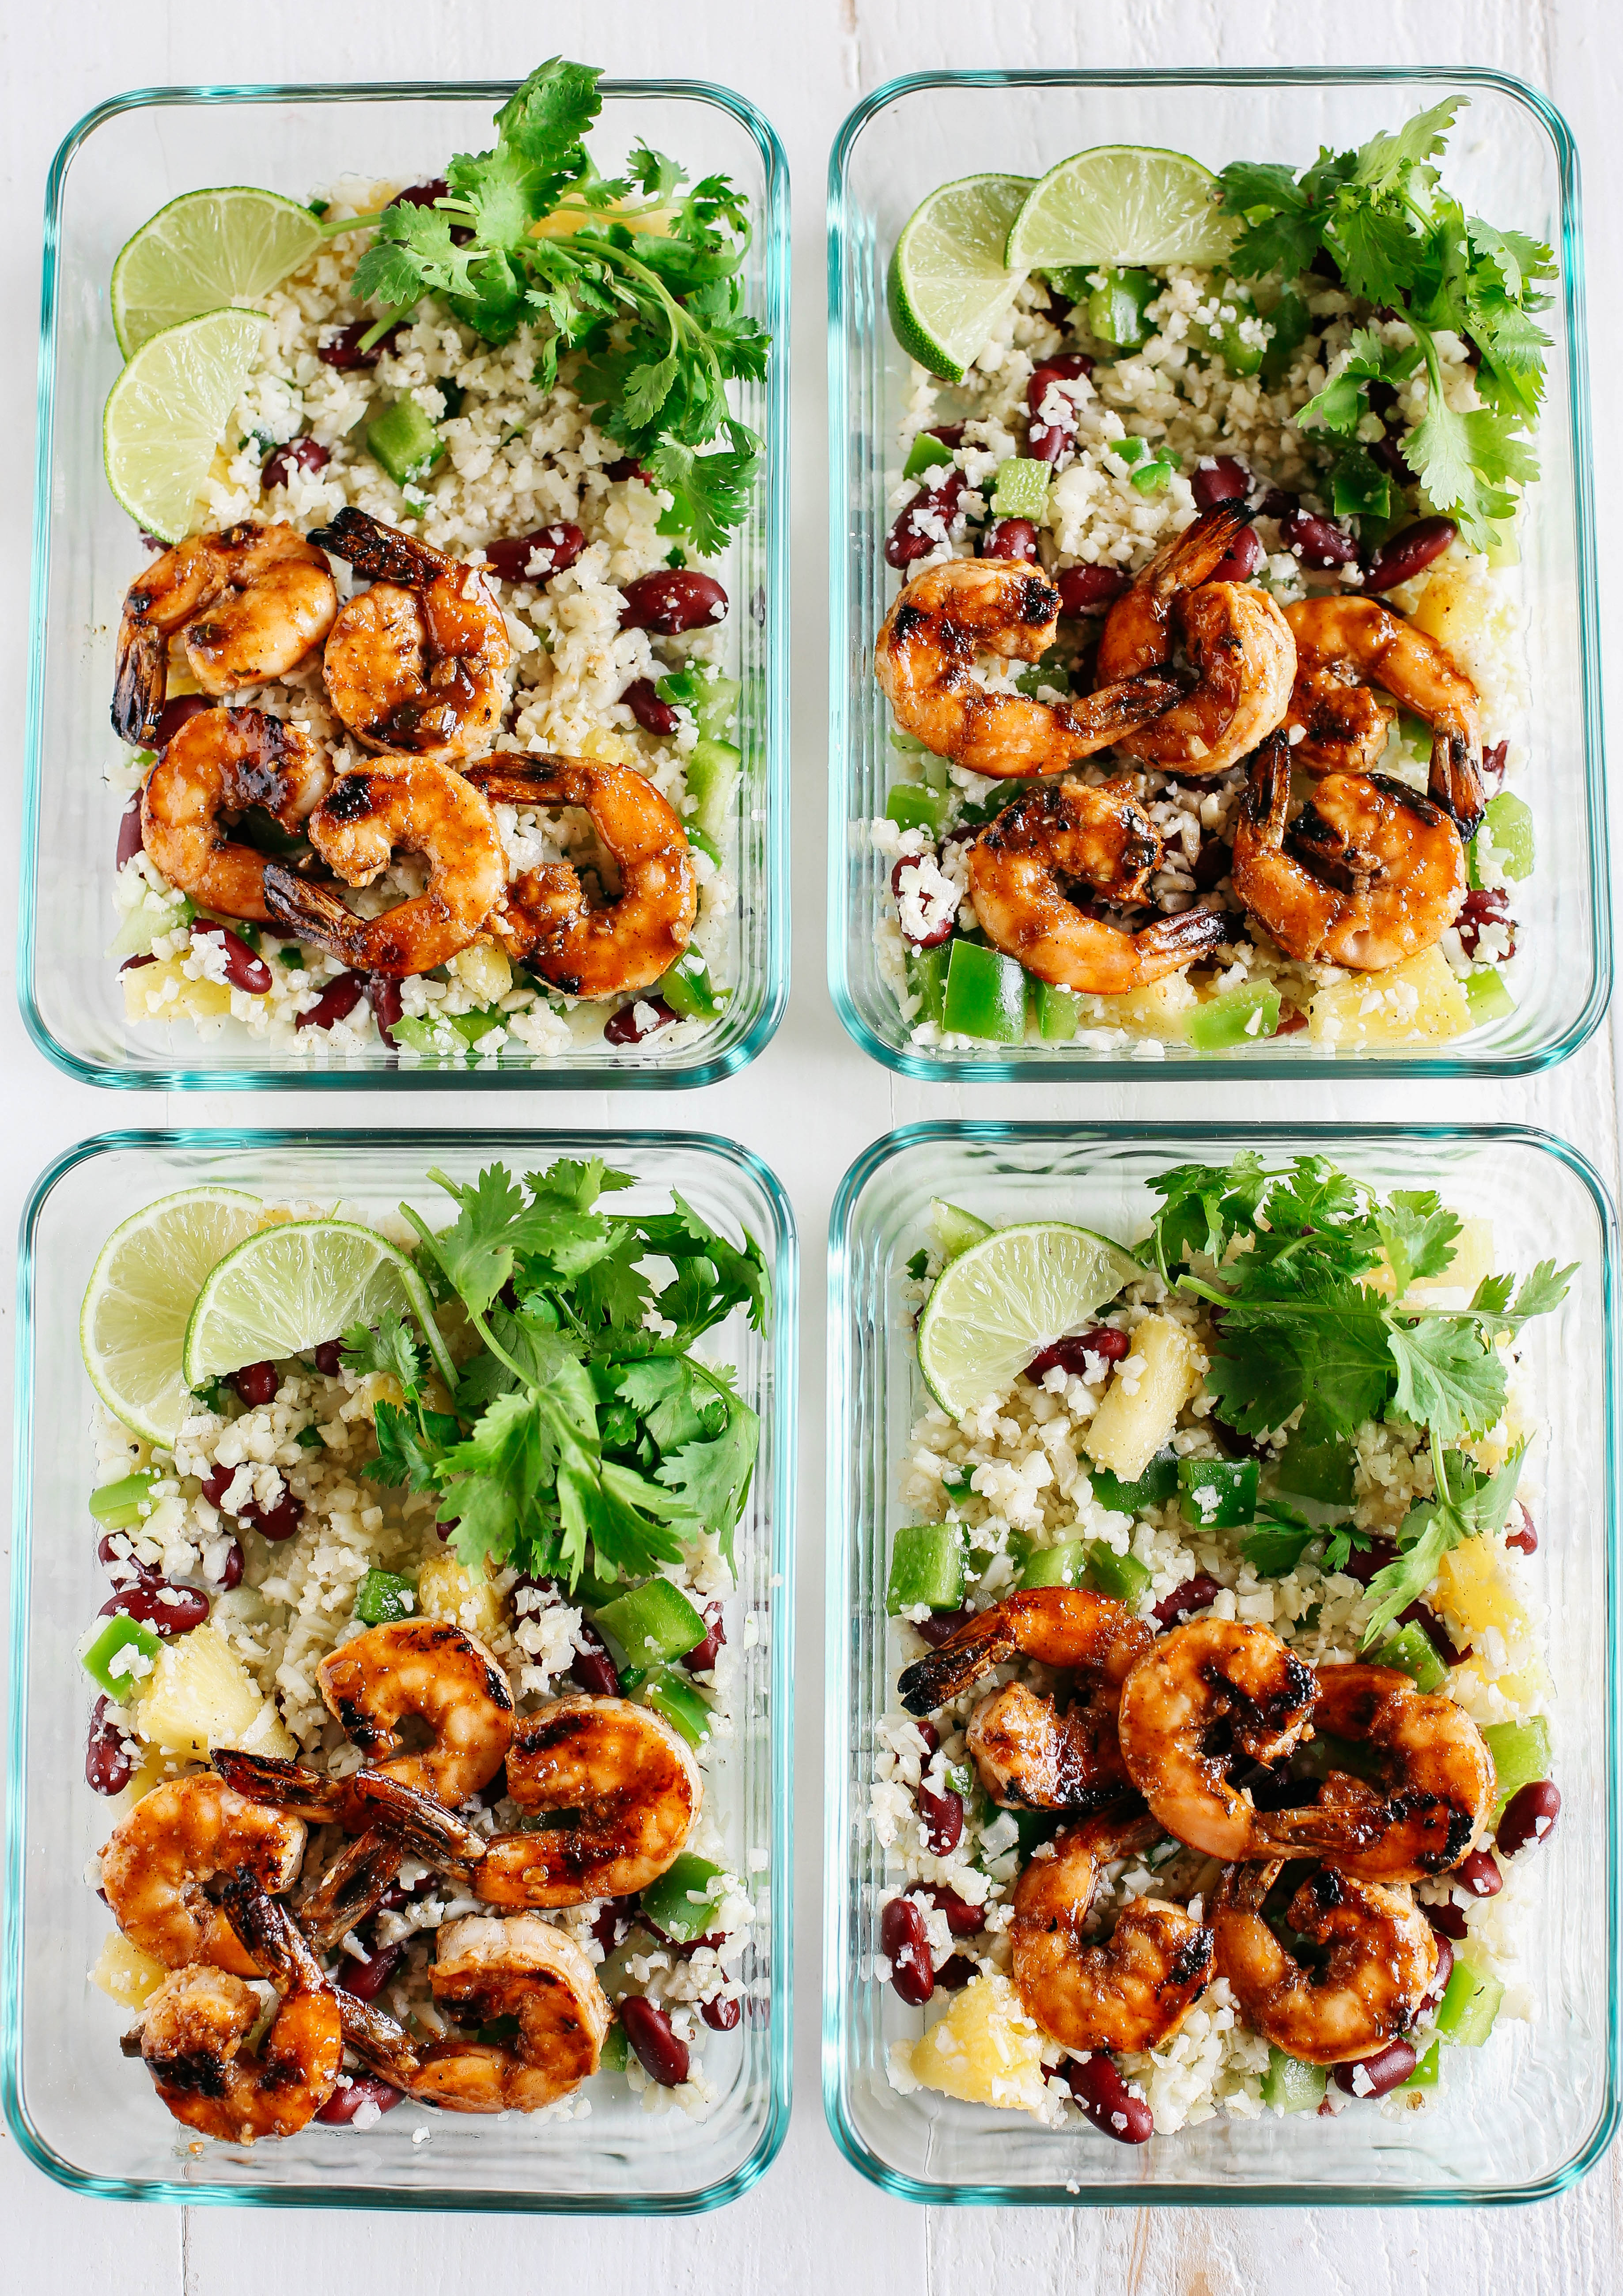 24 Weekly Meal-Prep Recipes You Can Make To Plan Ahead